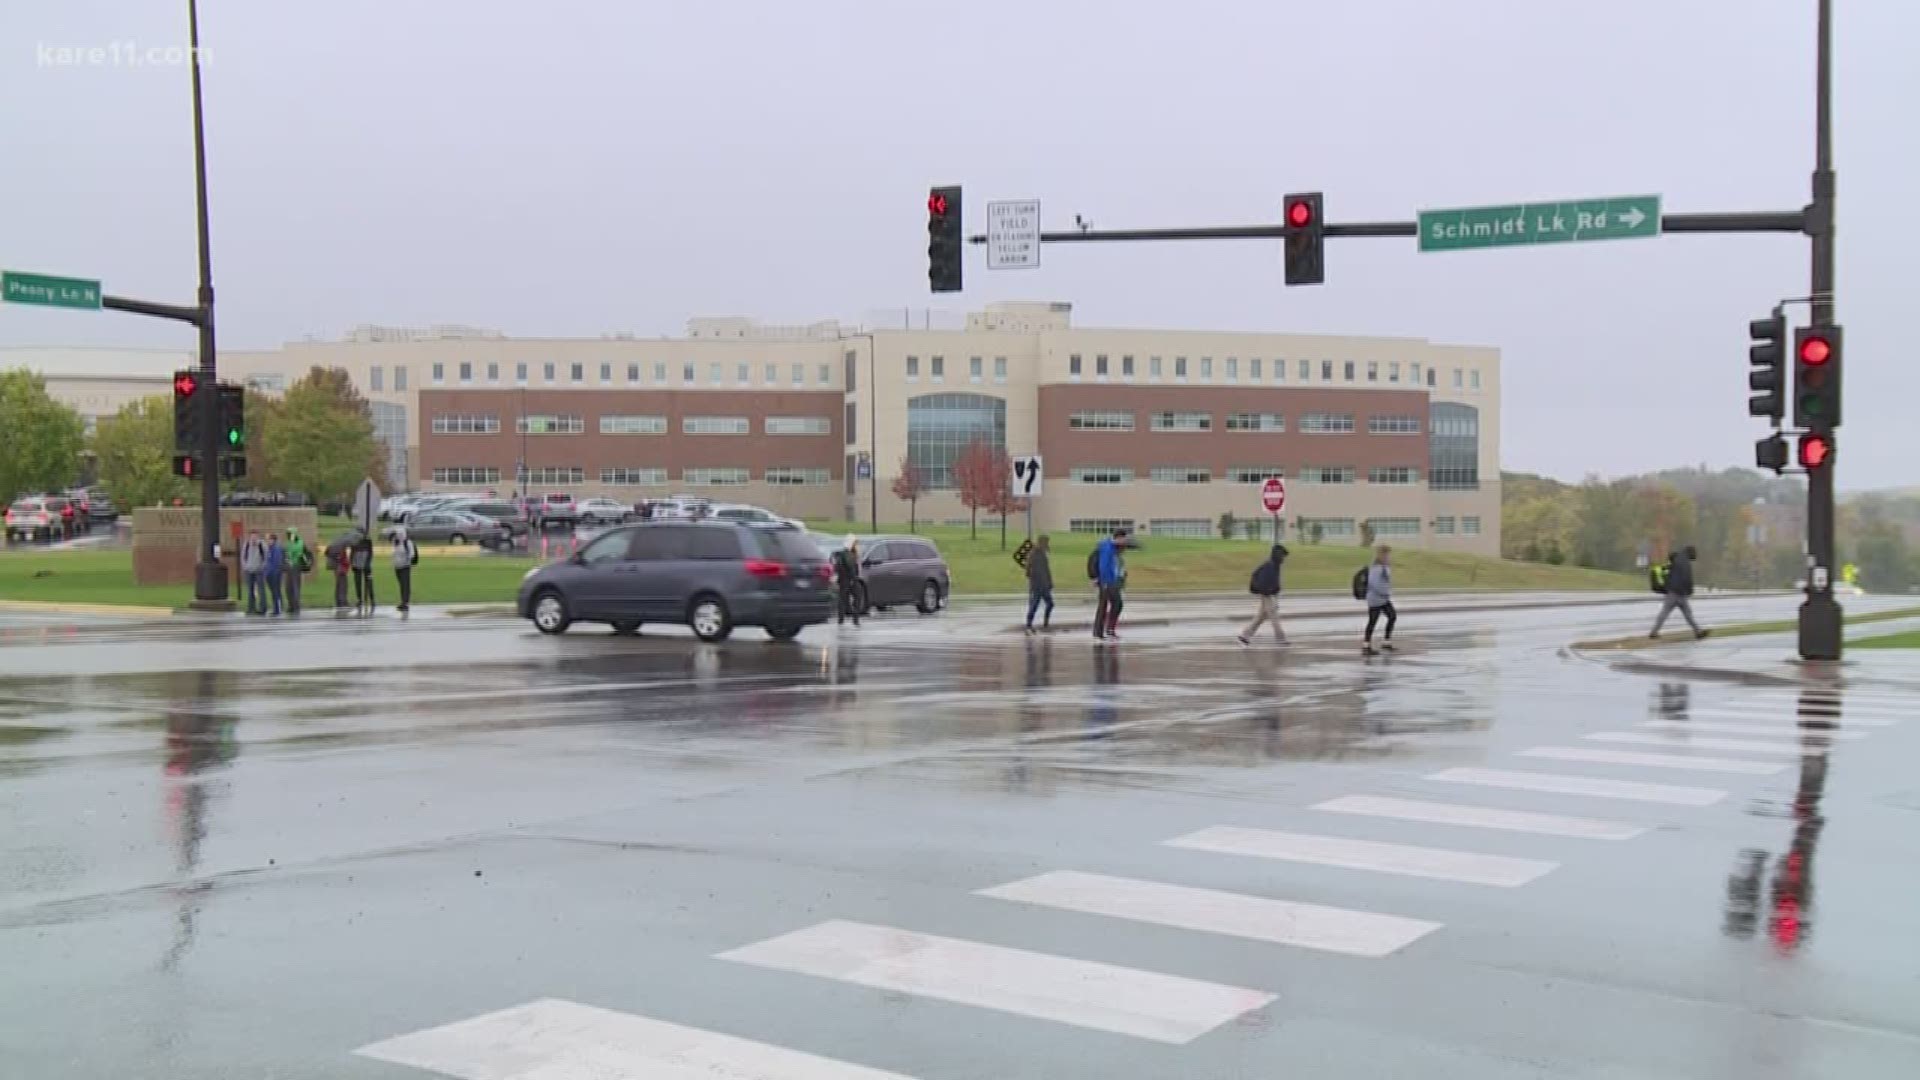 In just two months two students were hit by cars at Wayzata High School. Lou Raguse finds out what they and other school districts are doing to keep kids safe.